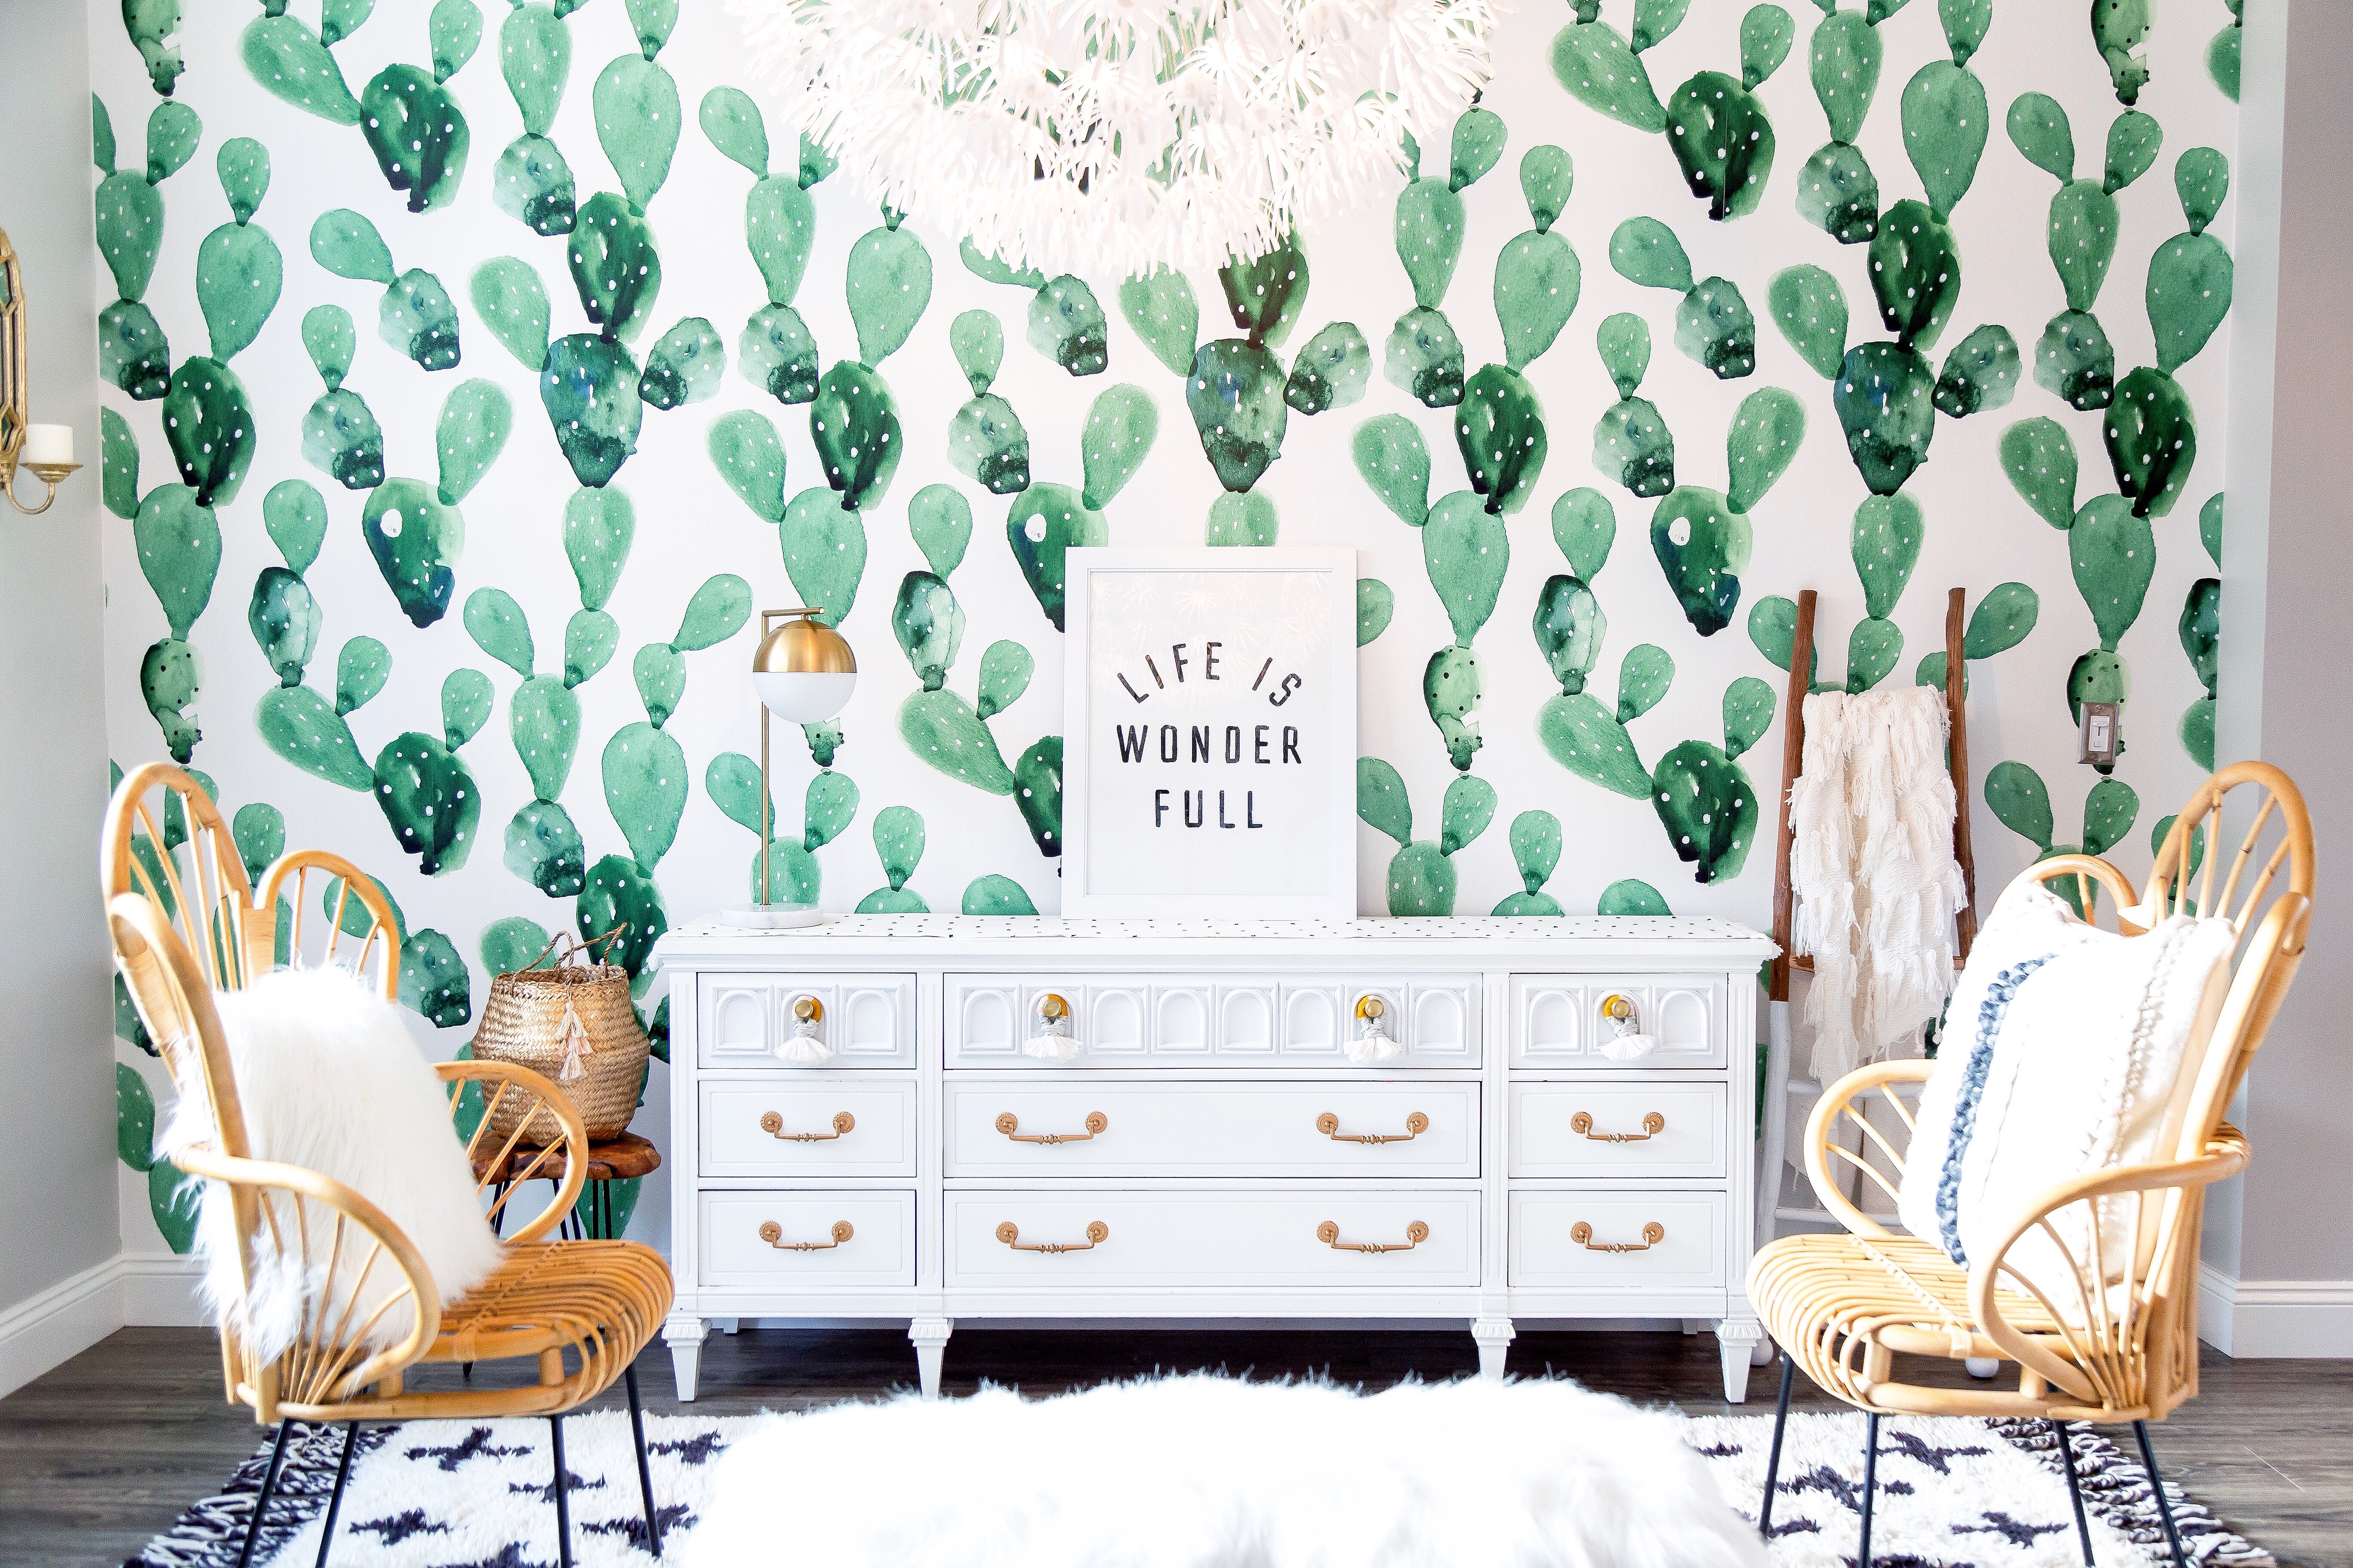 Removable Wallpaper Ideas, Rocky Mountain Decals, wallpaper room